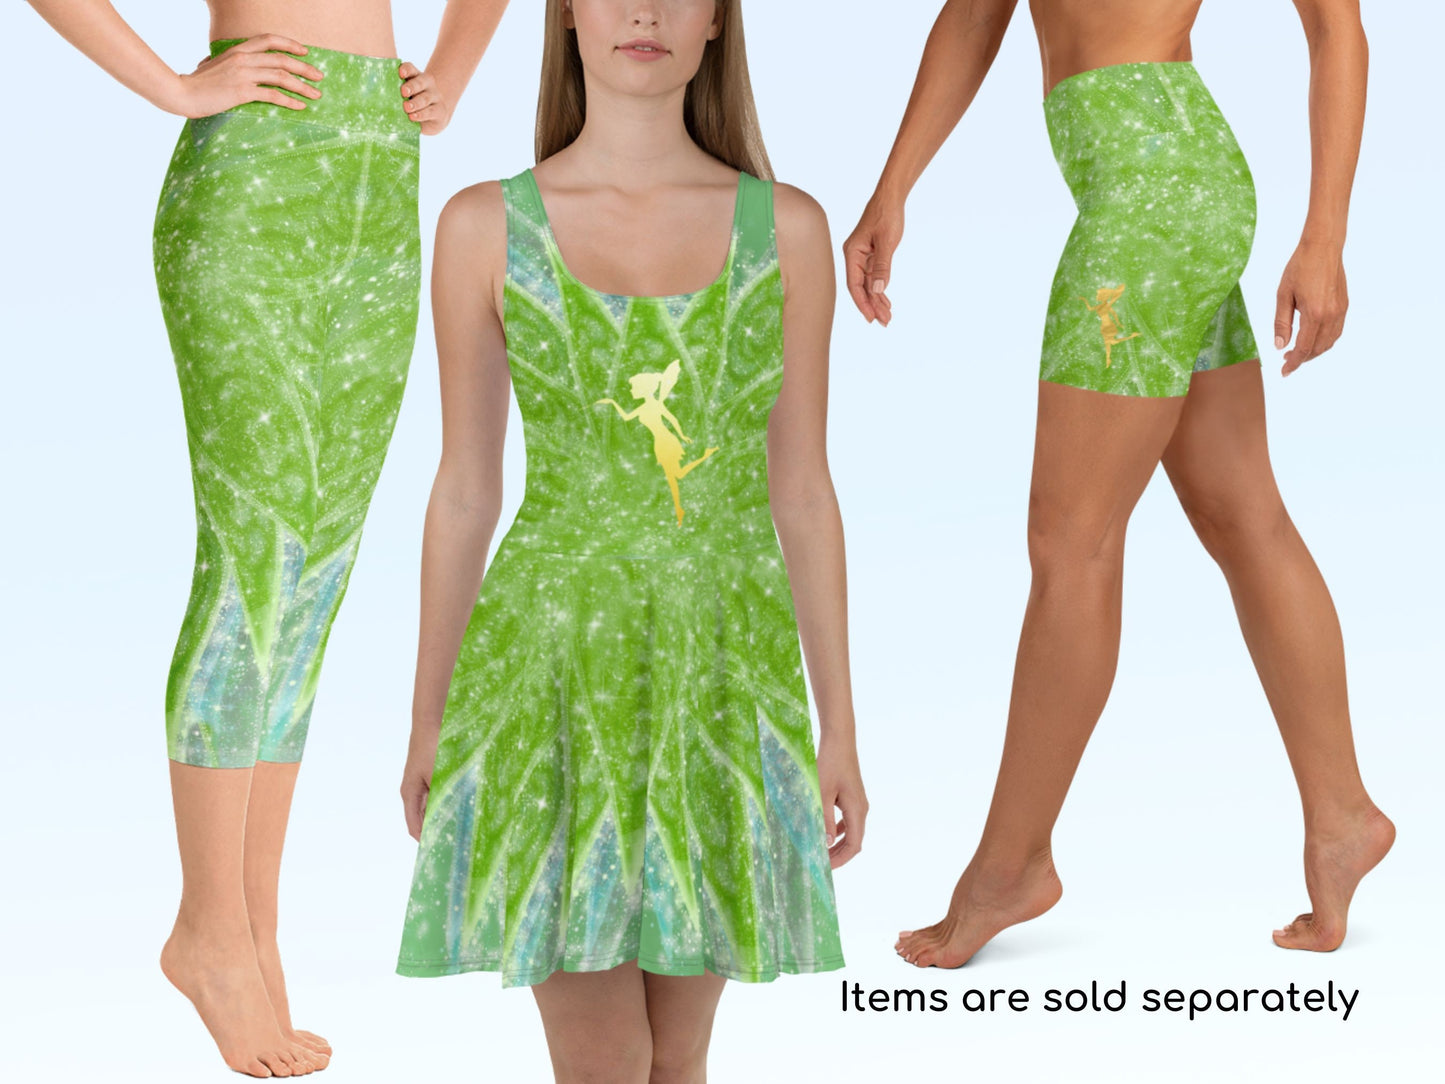 TinkerBell Fairy Inspired Skater Dress Yoga Capris & Shorts Running Costume Activewear Princess Halloween Cosplay Gift for Her Birthday